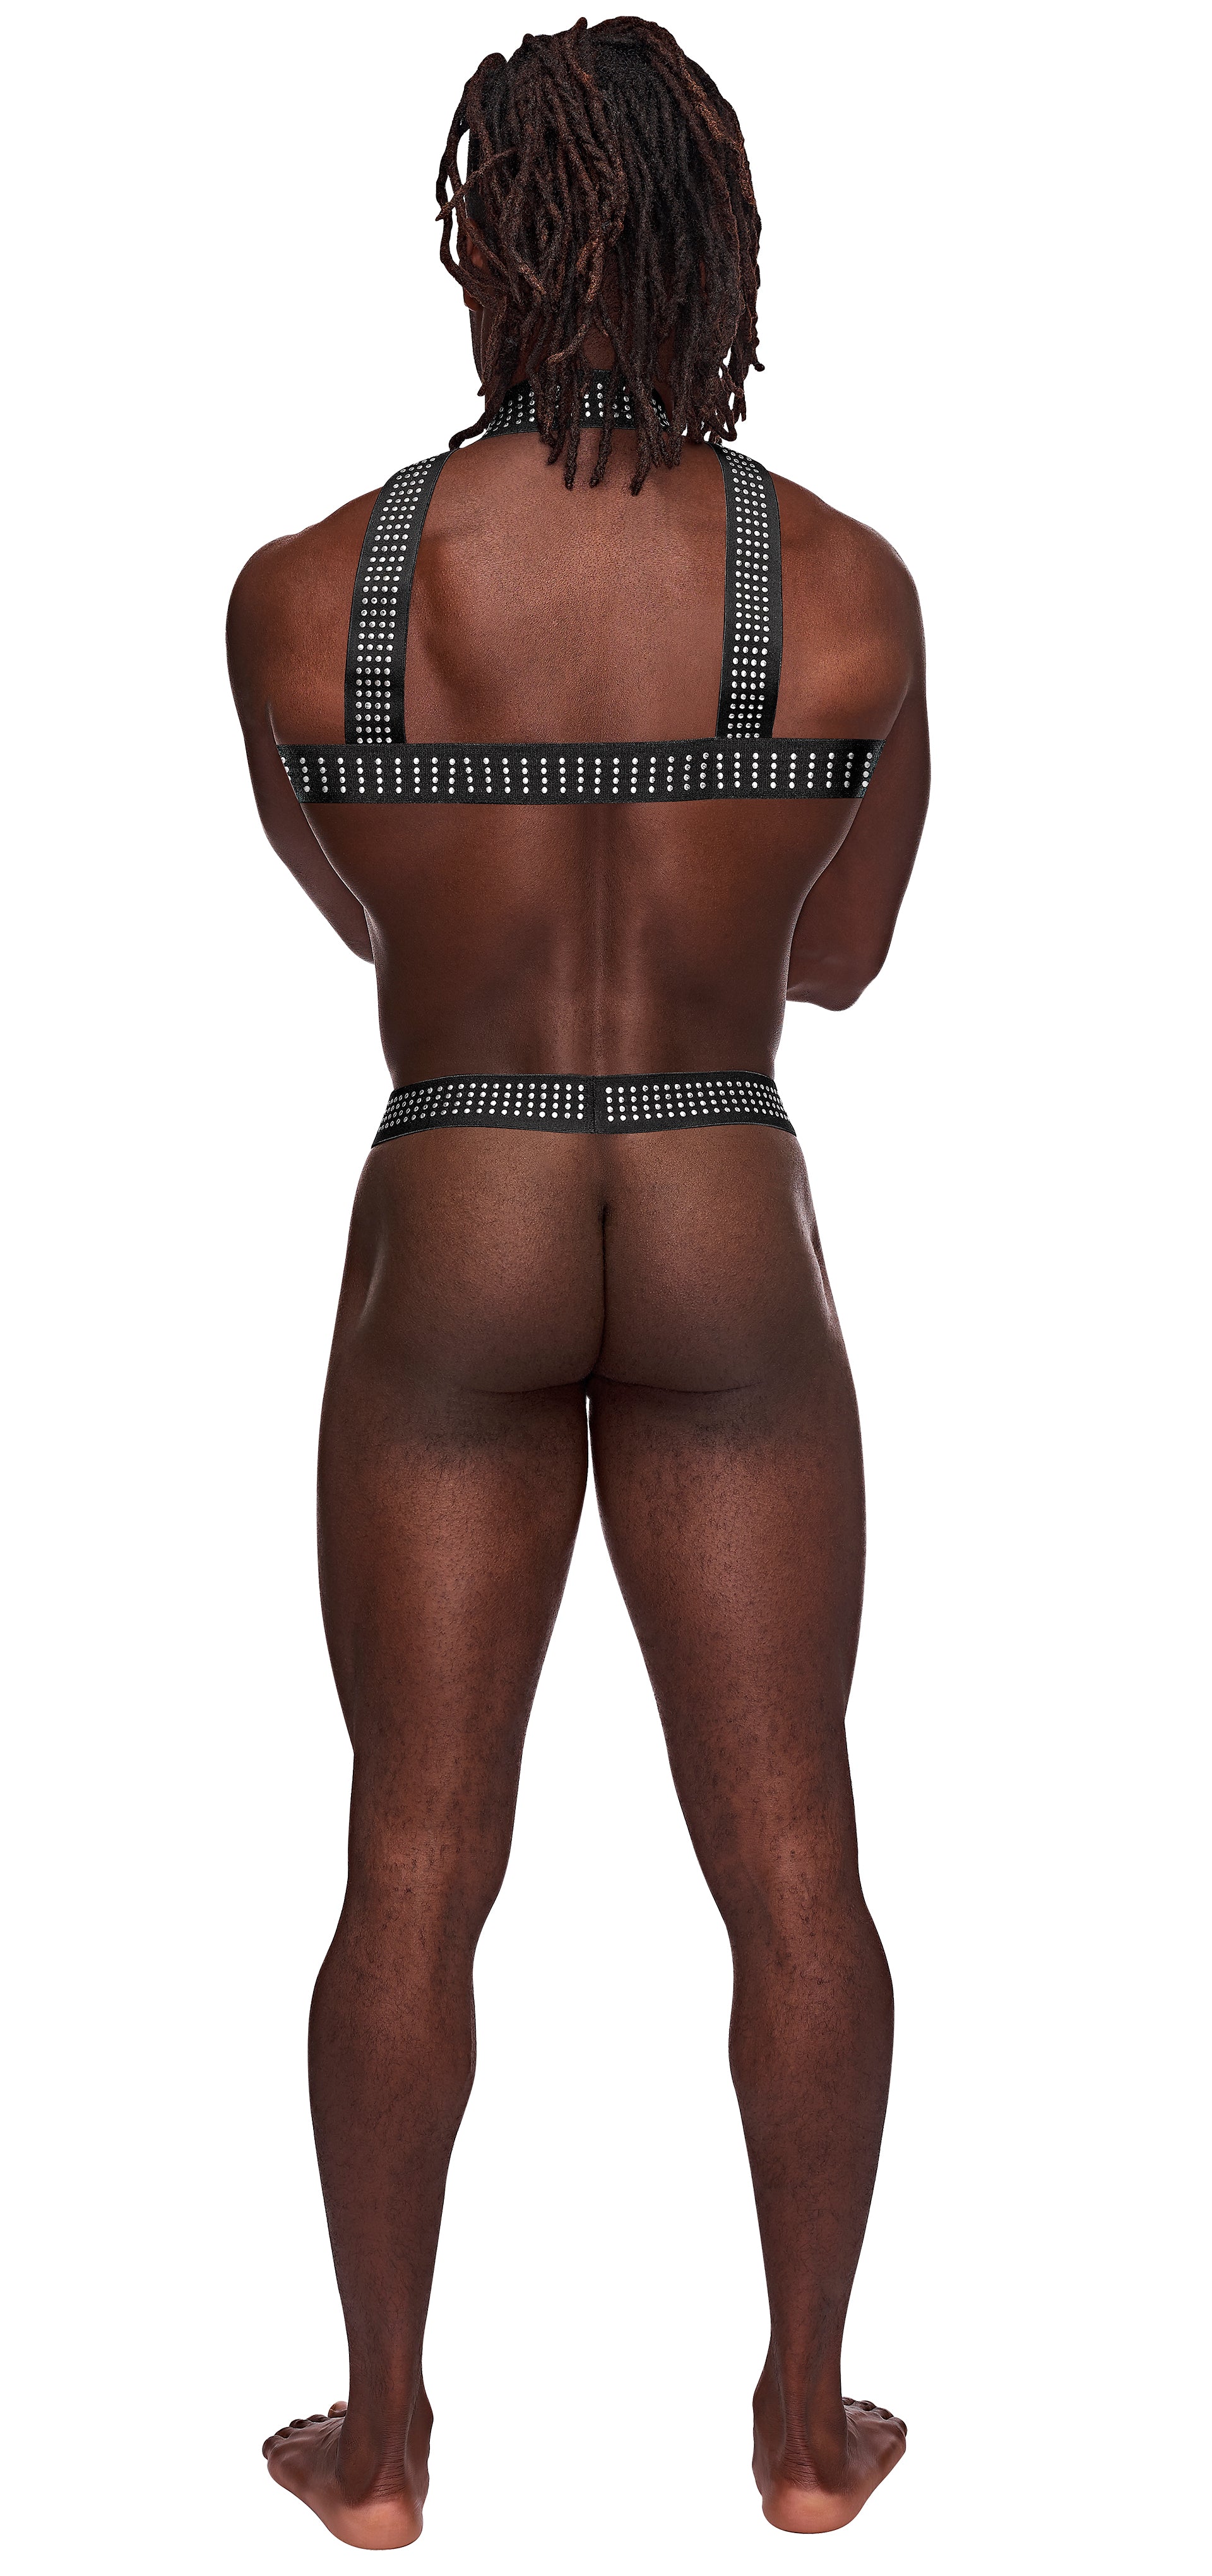 Male Power Studded Harness - Black Back View